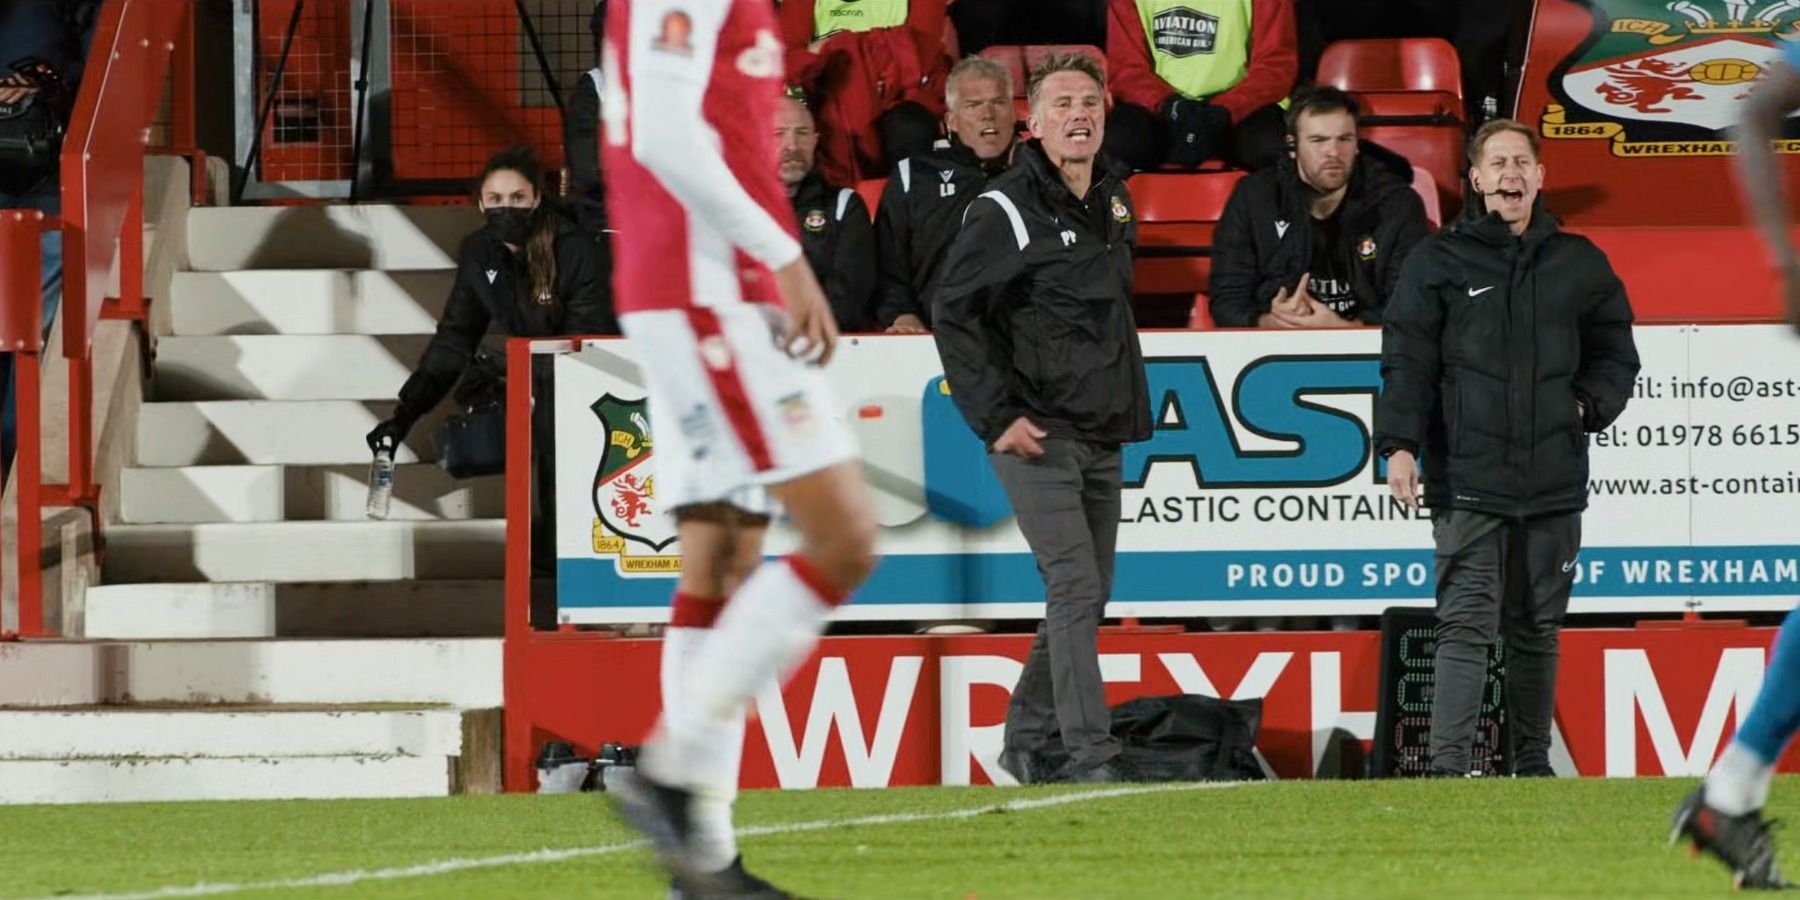 Wrexham AFC manager Phil Parkinson screaming on the sidelines Welcome to Wrexham